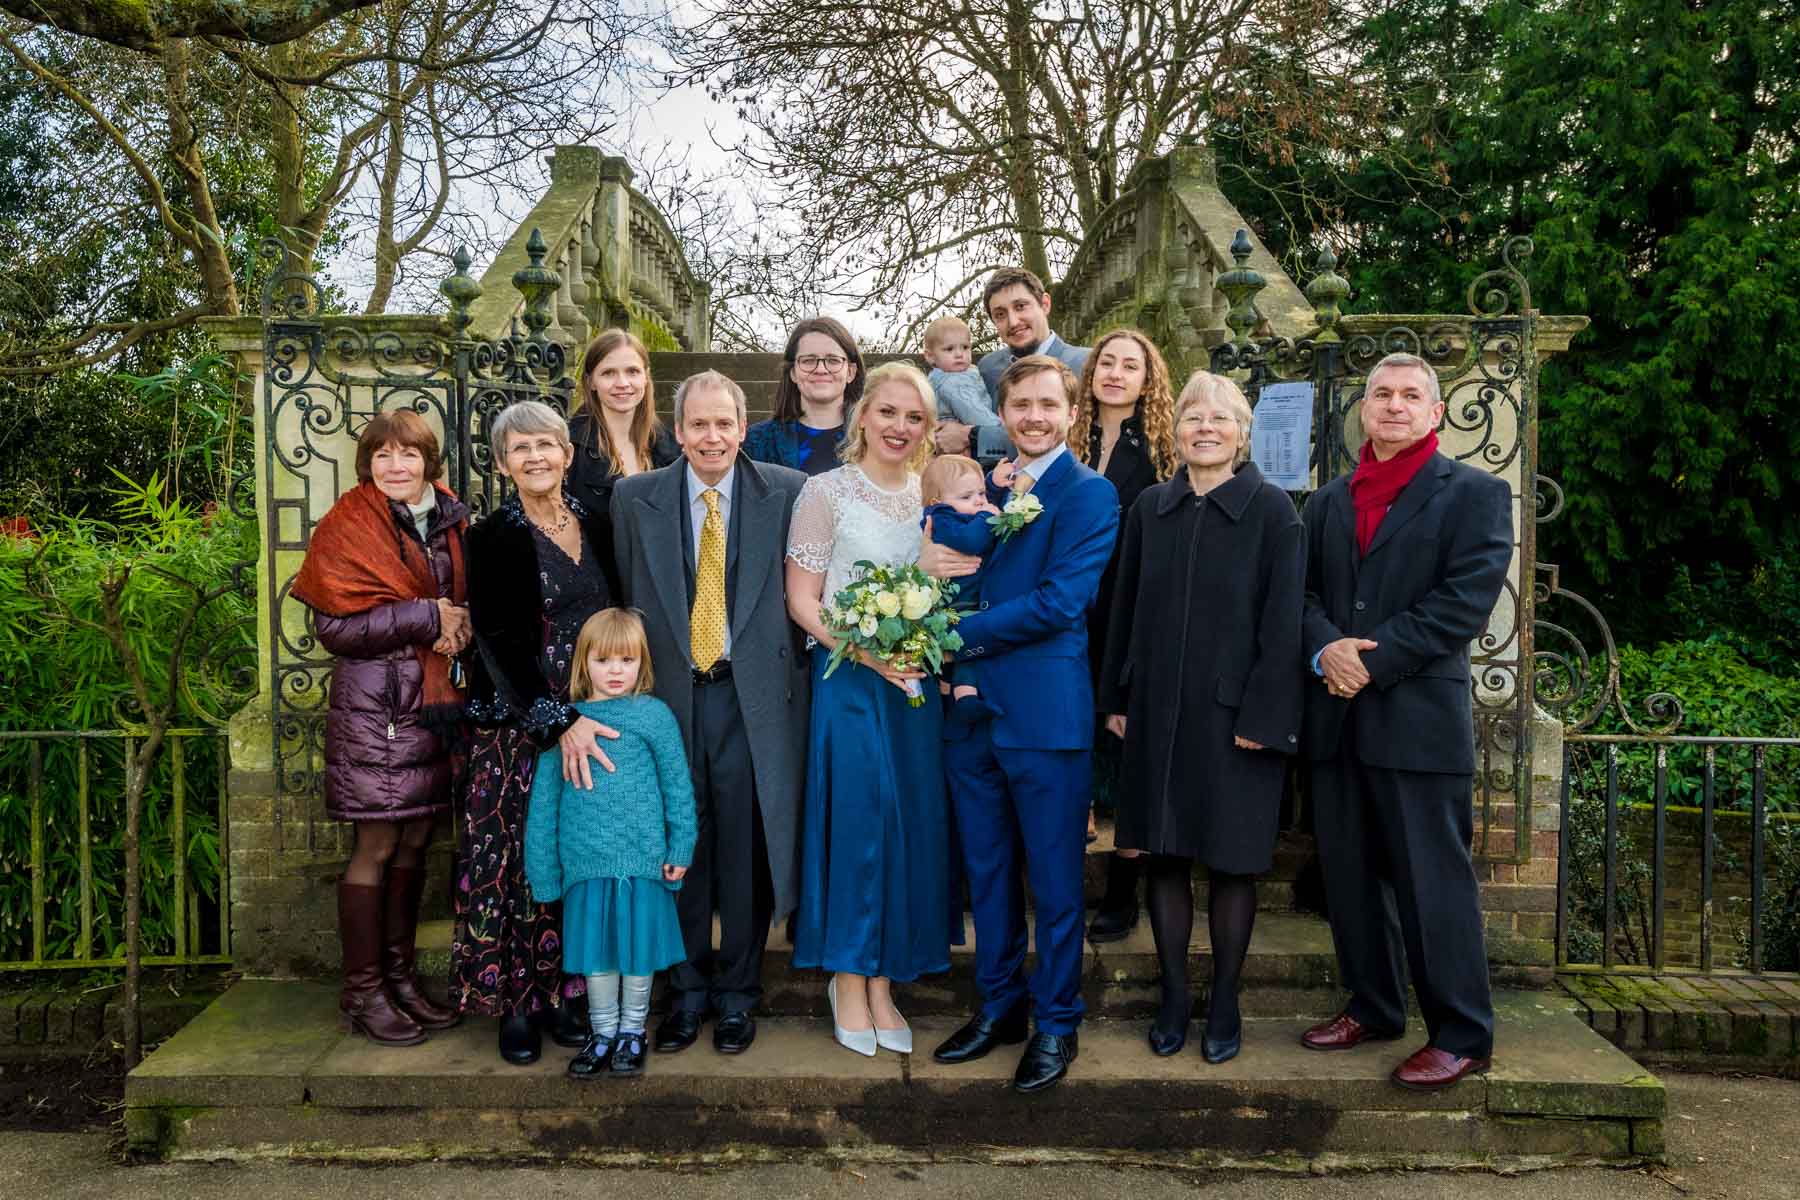 Small wedding party pose for photos on steps to bridge at York House in Twickenham.